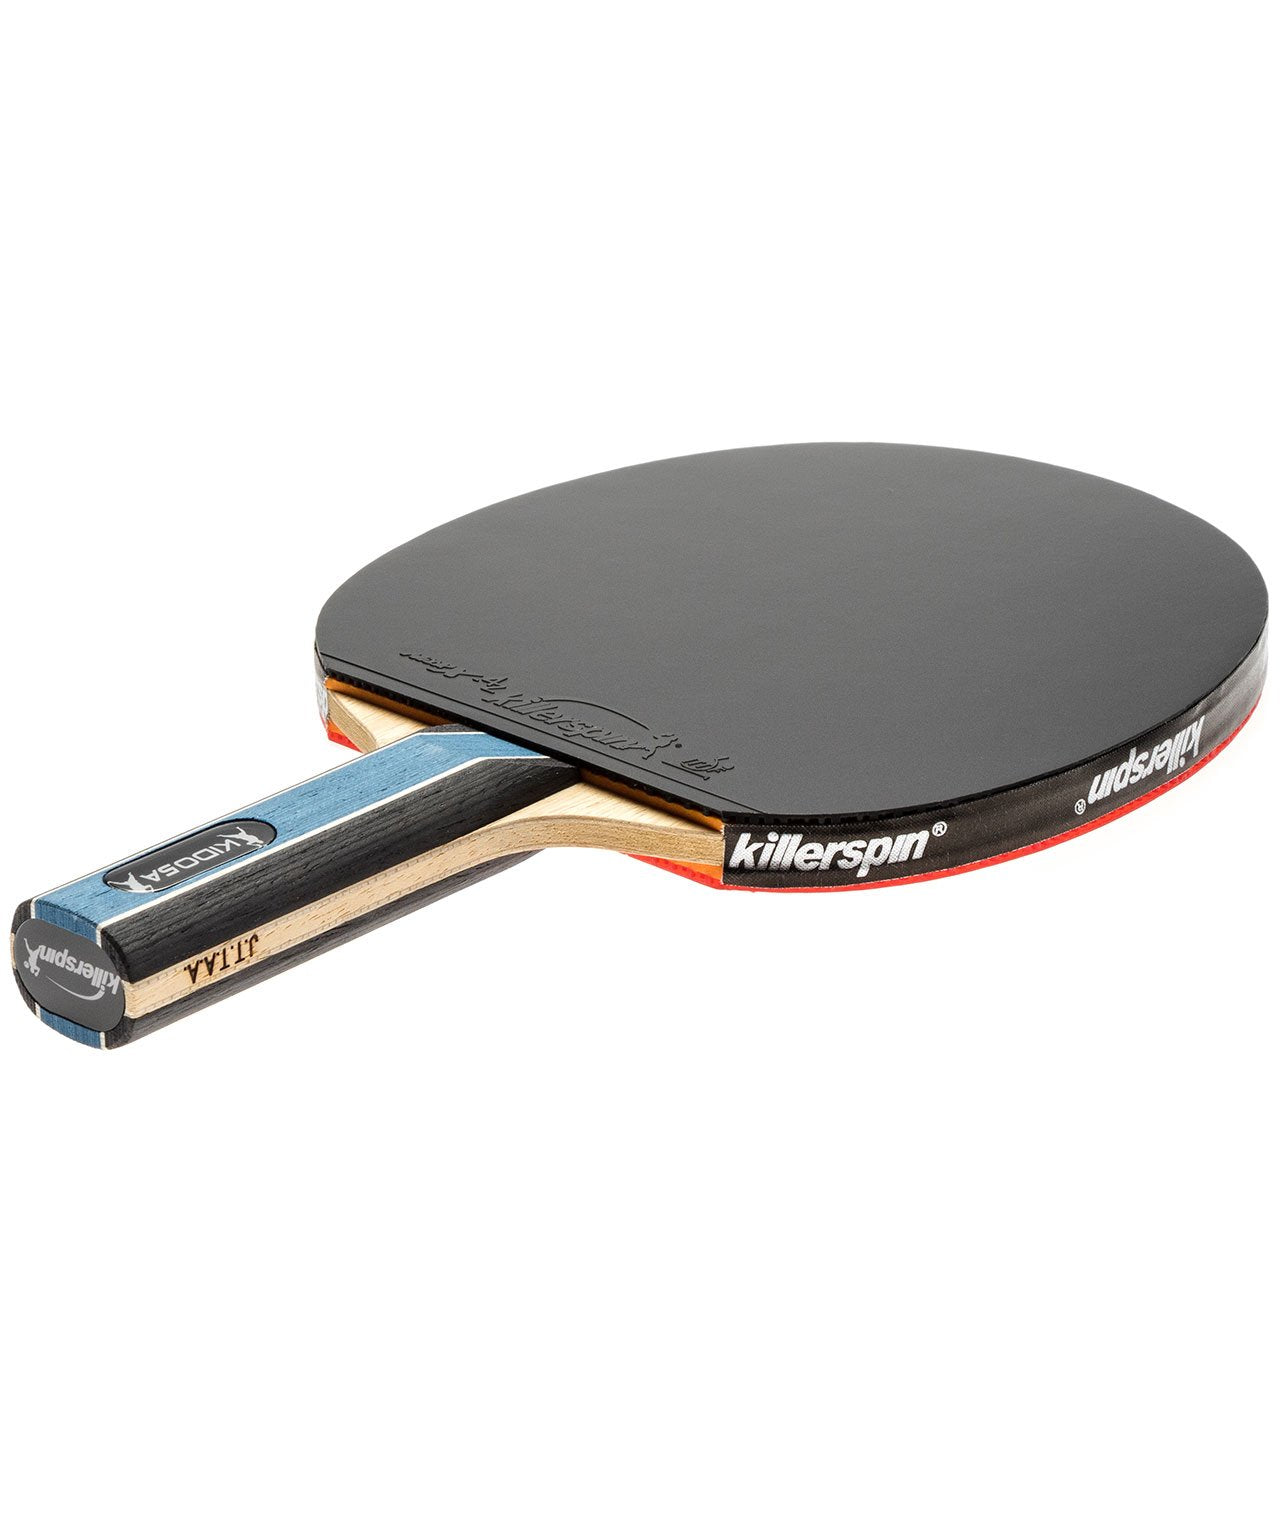 Killerspin Ping Pong Paddle Kido 5A RTG - Straight Black Rubber